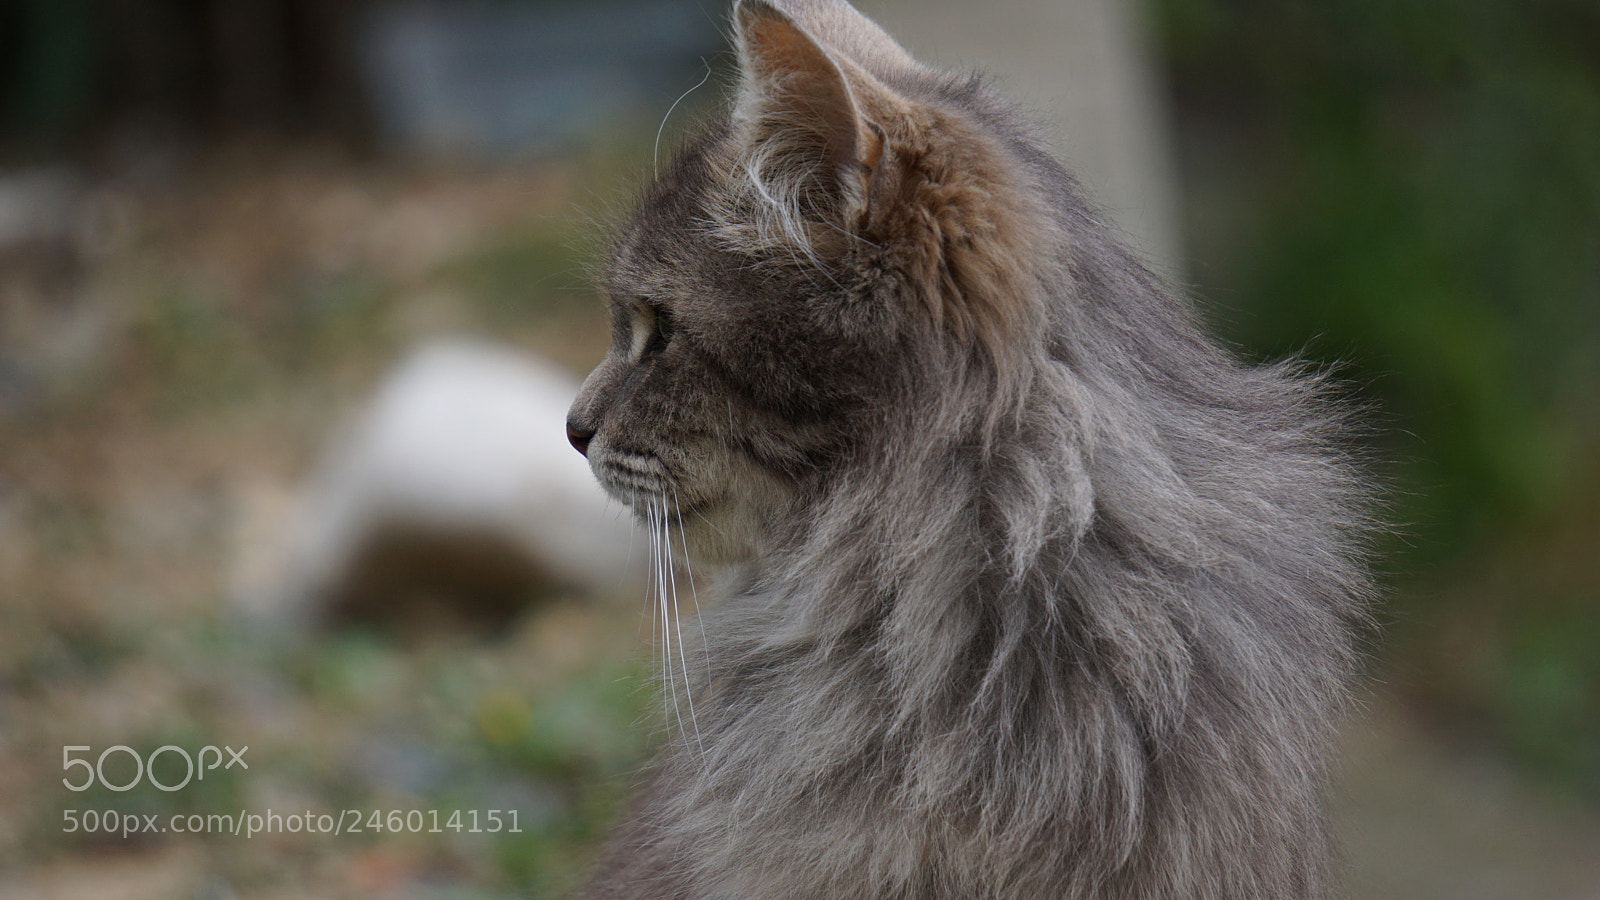 Sony a6000 sample photo. A savage cat's profile photography